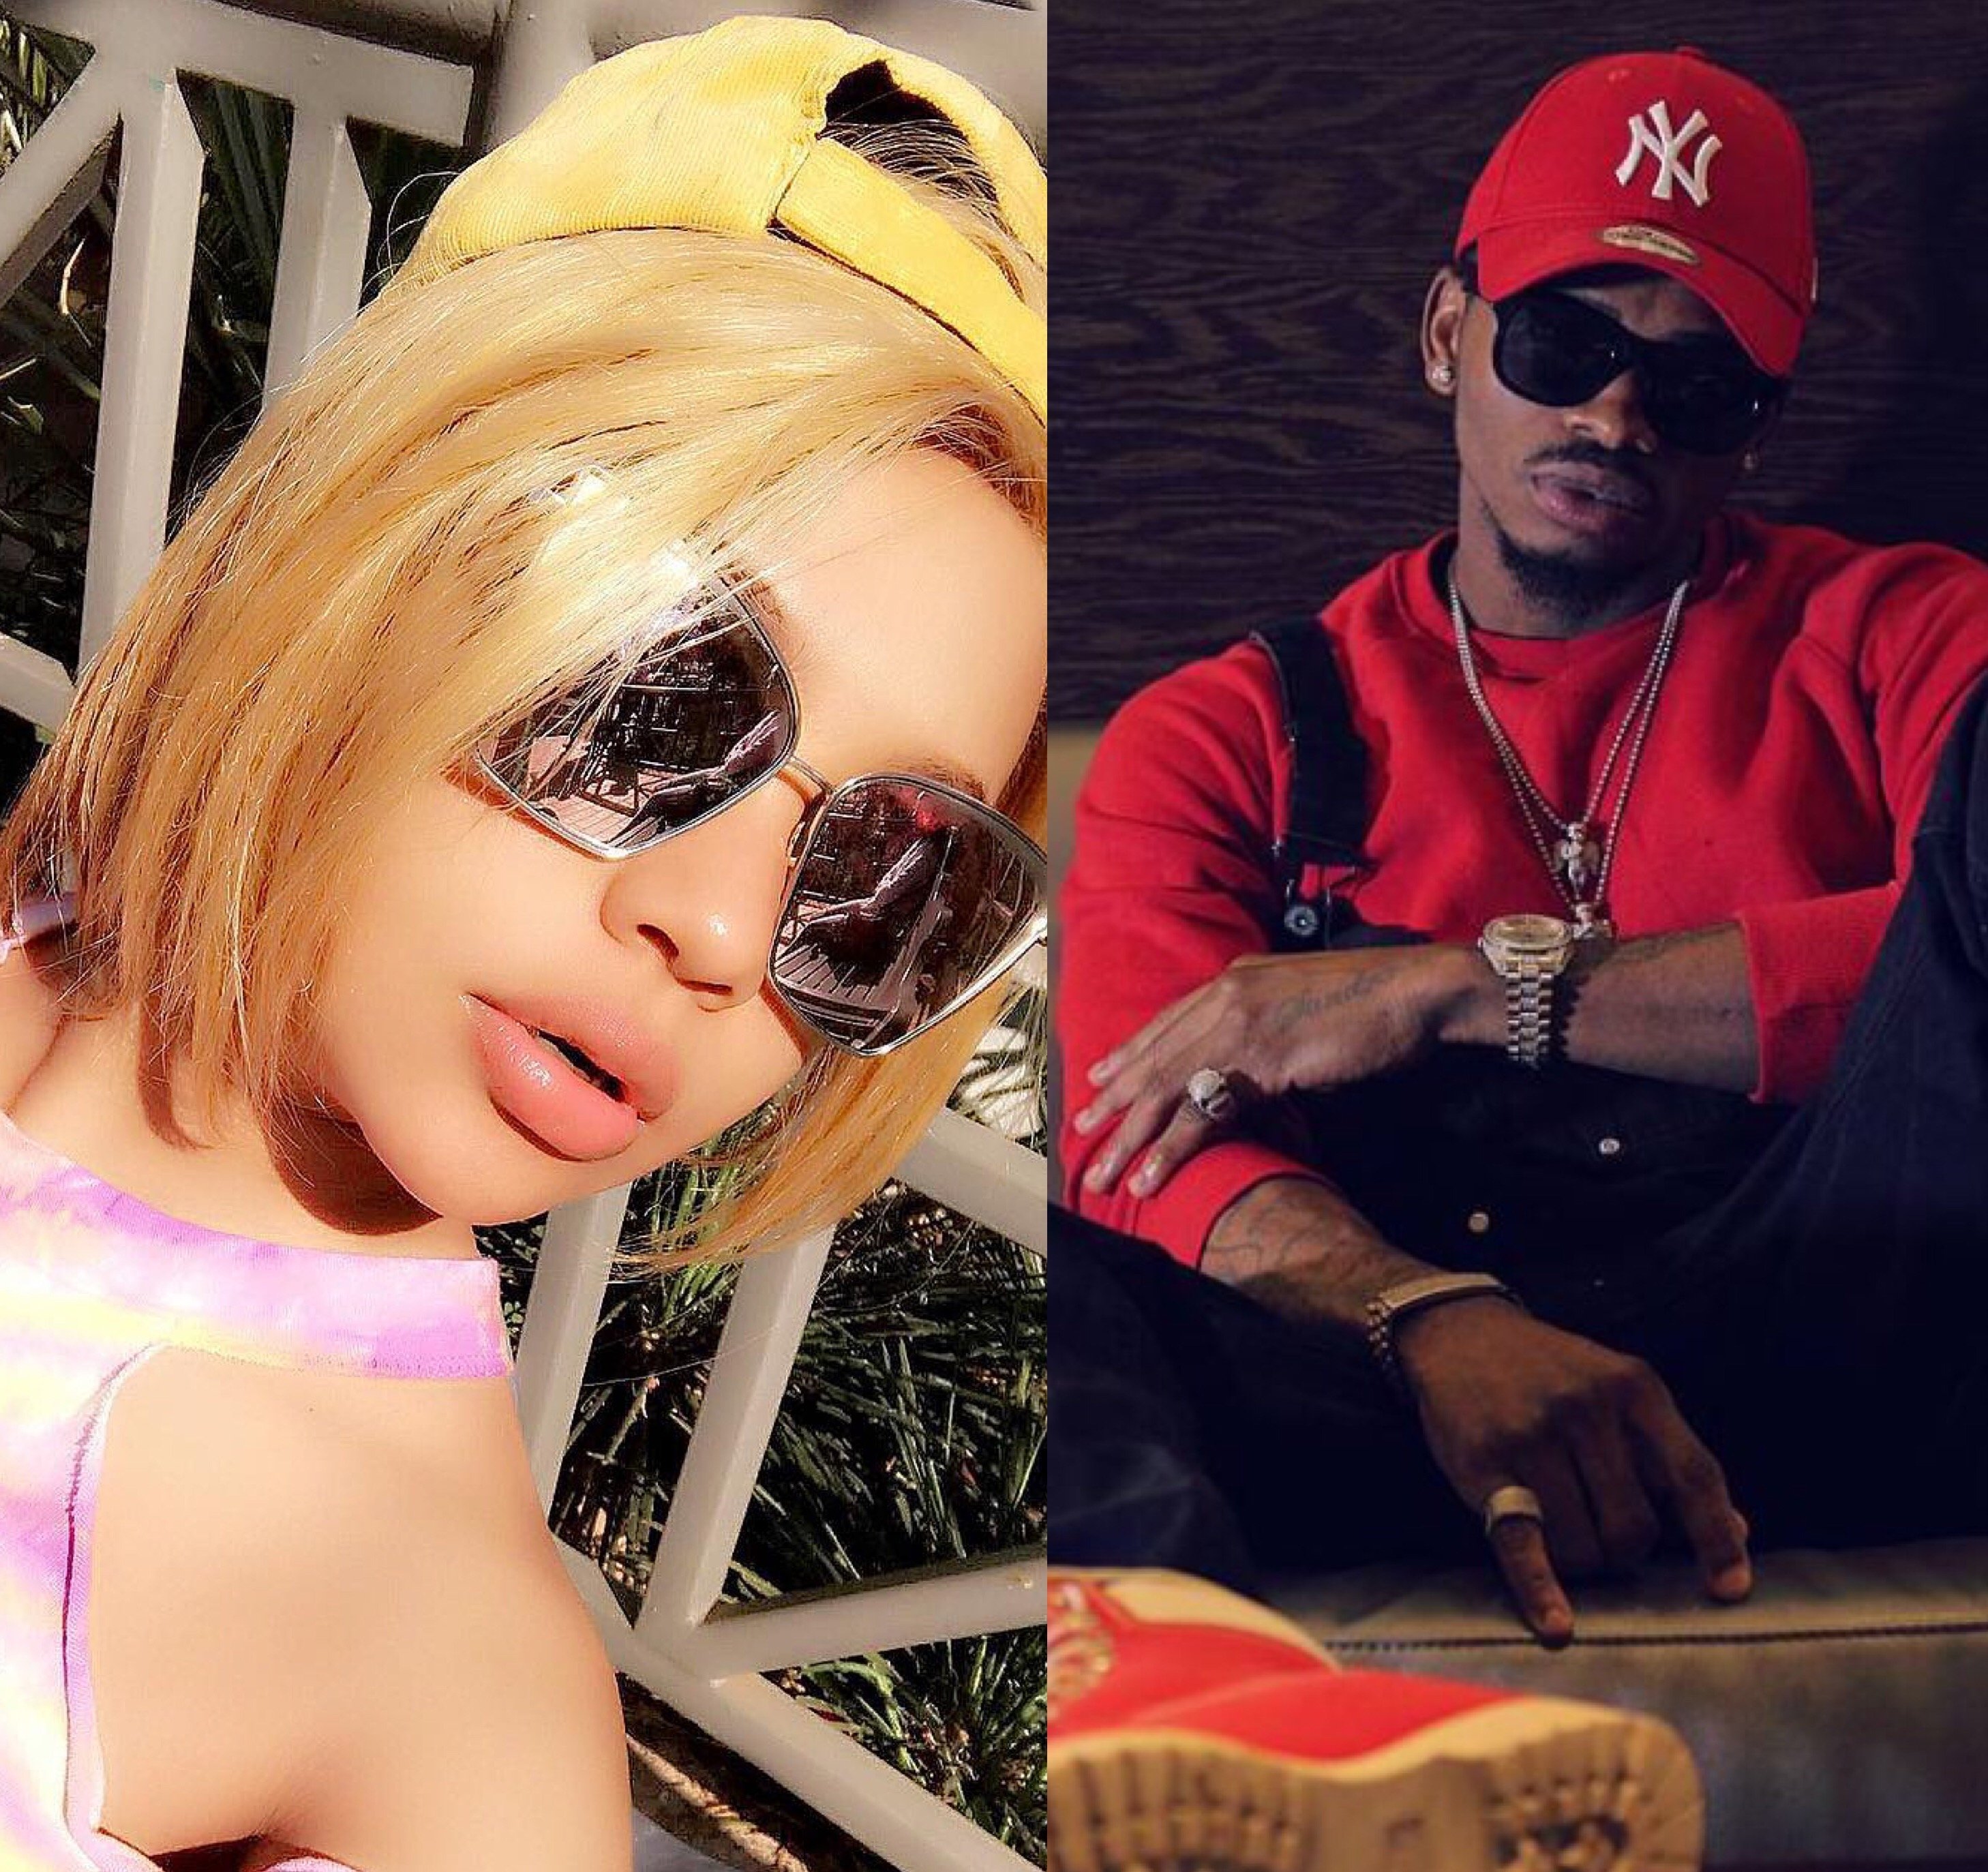 Popular 19 year old video vixen talks about her relationship with Diamond Platnumz and how she got pregnant for him